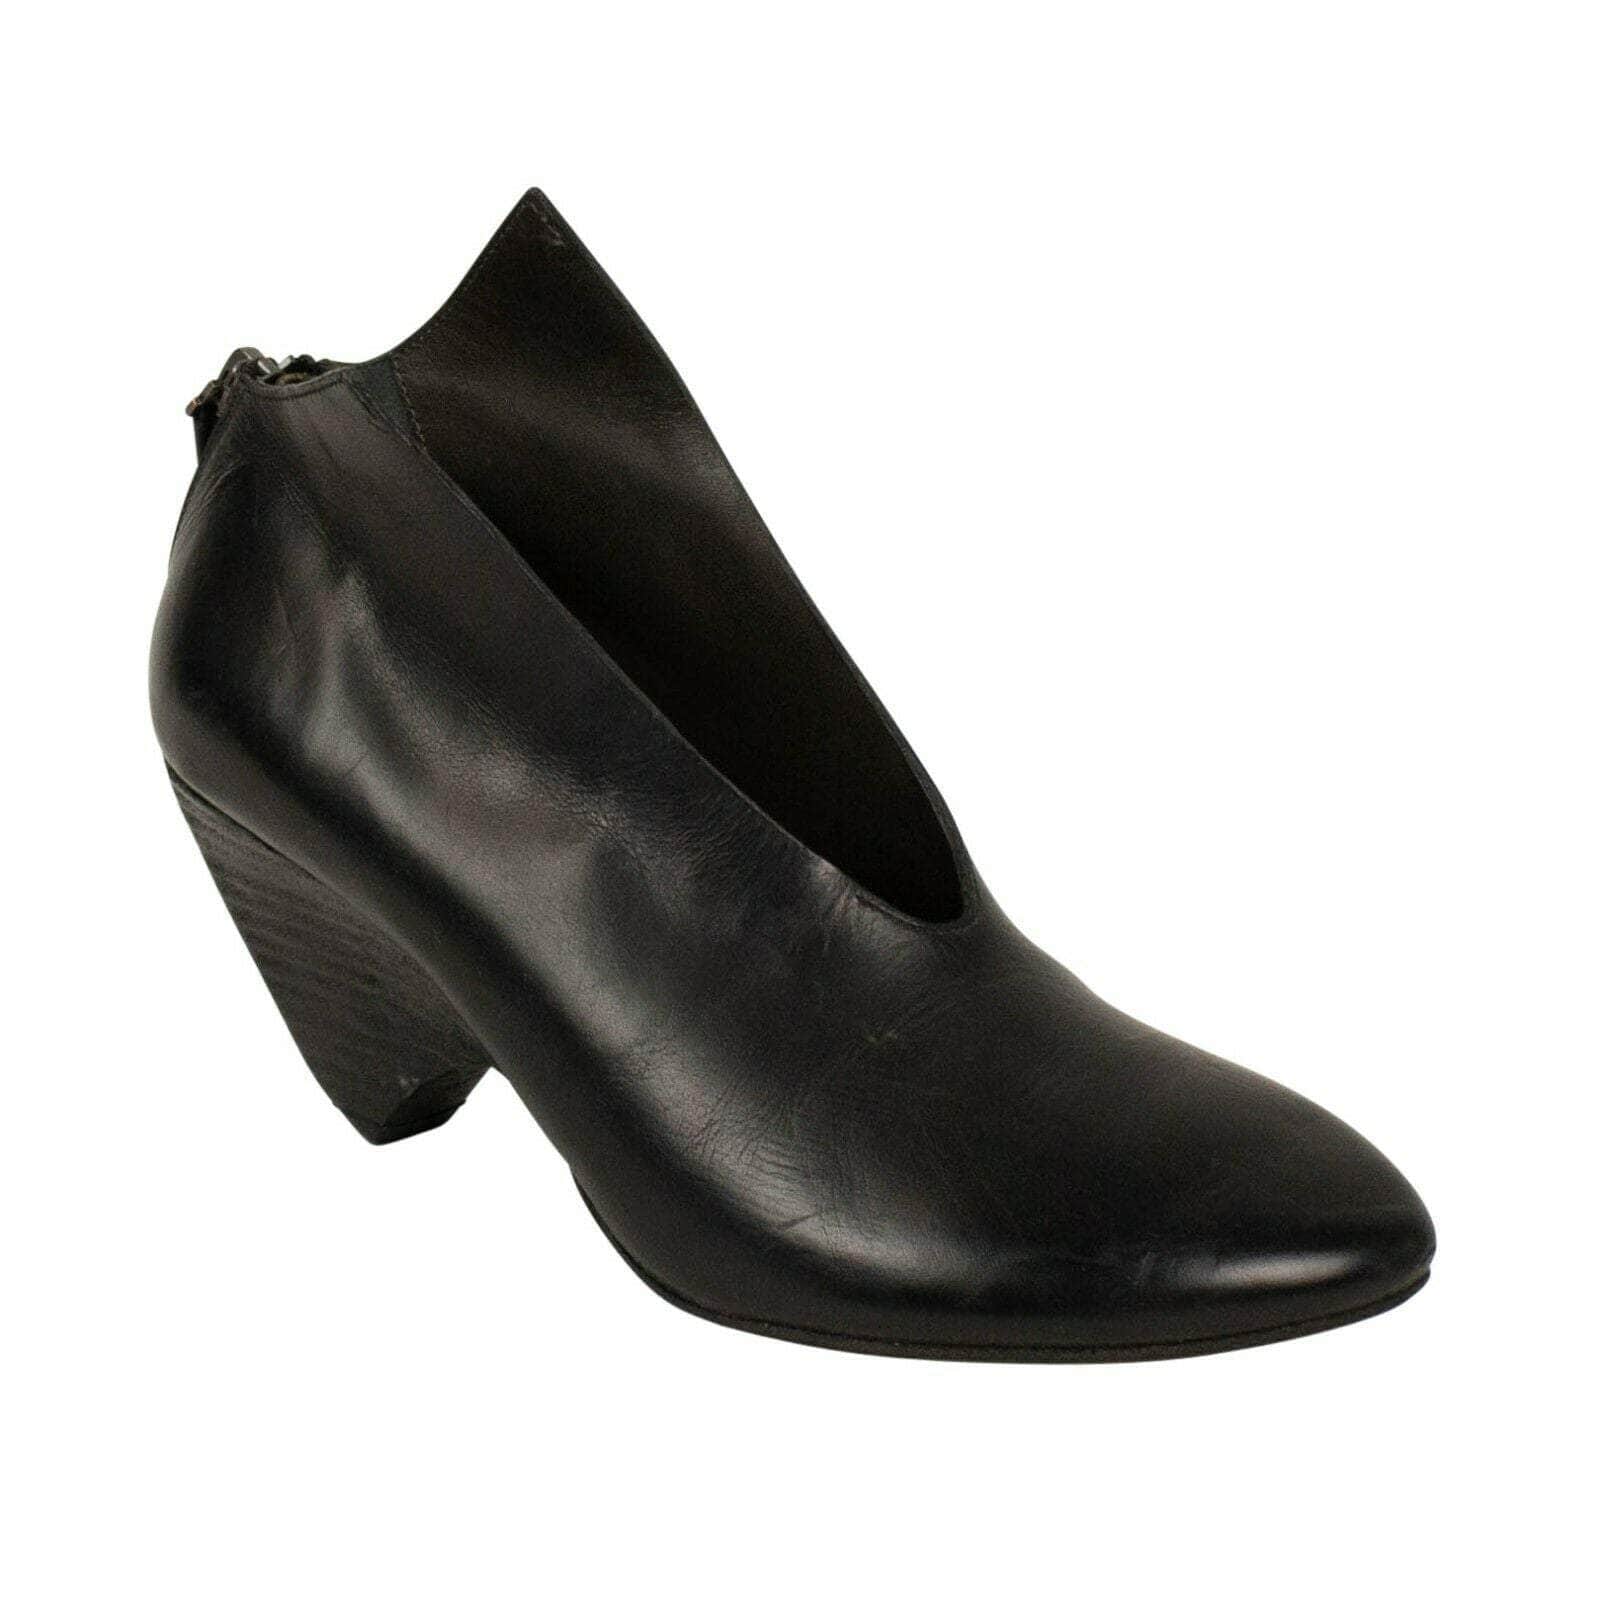 Marsell channelenable-all, chicmi, couponcollection, gender-womens, main-shoes, marsell, shop375, size-7-5, under-250, womens-ankle-boots 7.5 Livellina' Black Calf Skin Leather Ankle Boots 69LE-2127/7.5 69LE-2127/7.5